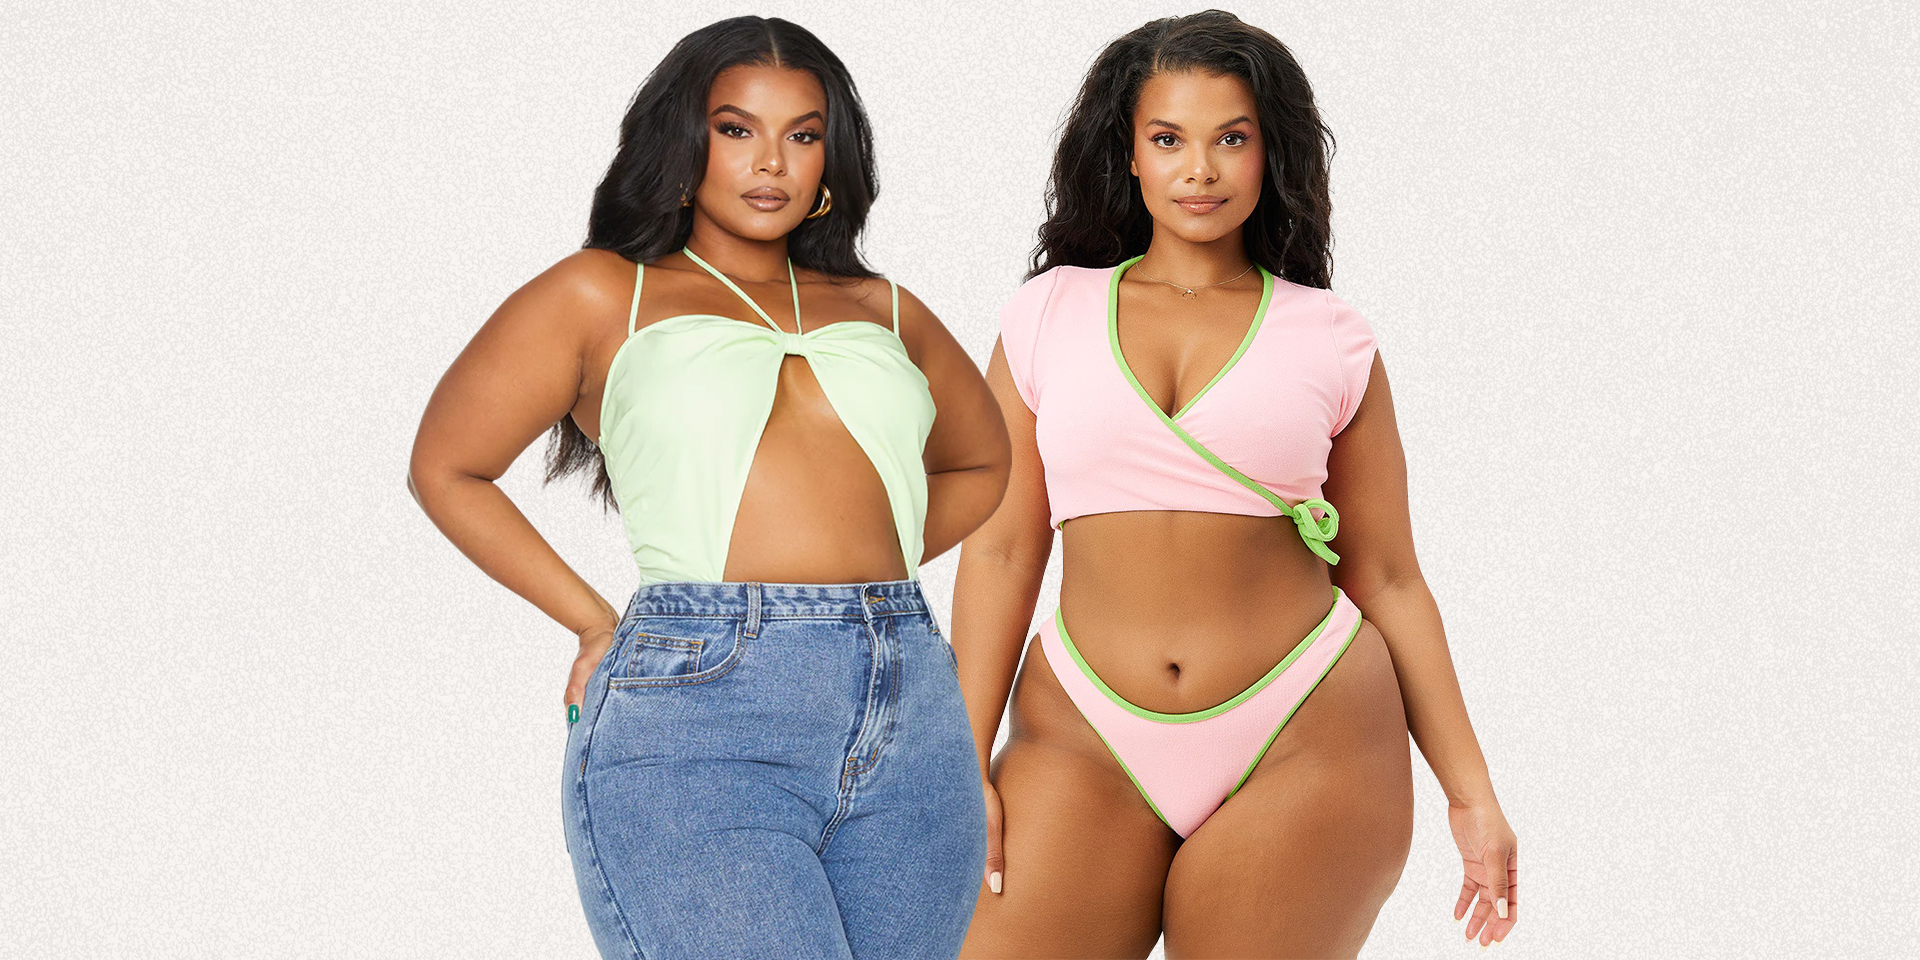 Plus Size Summer Outfits 